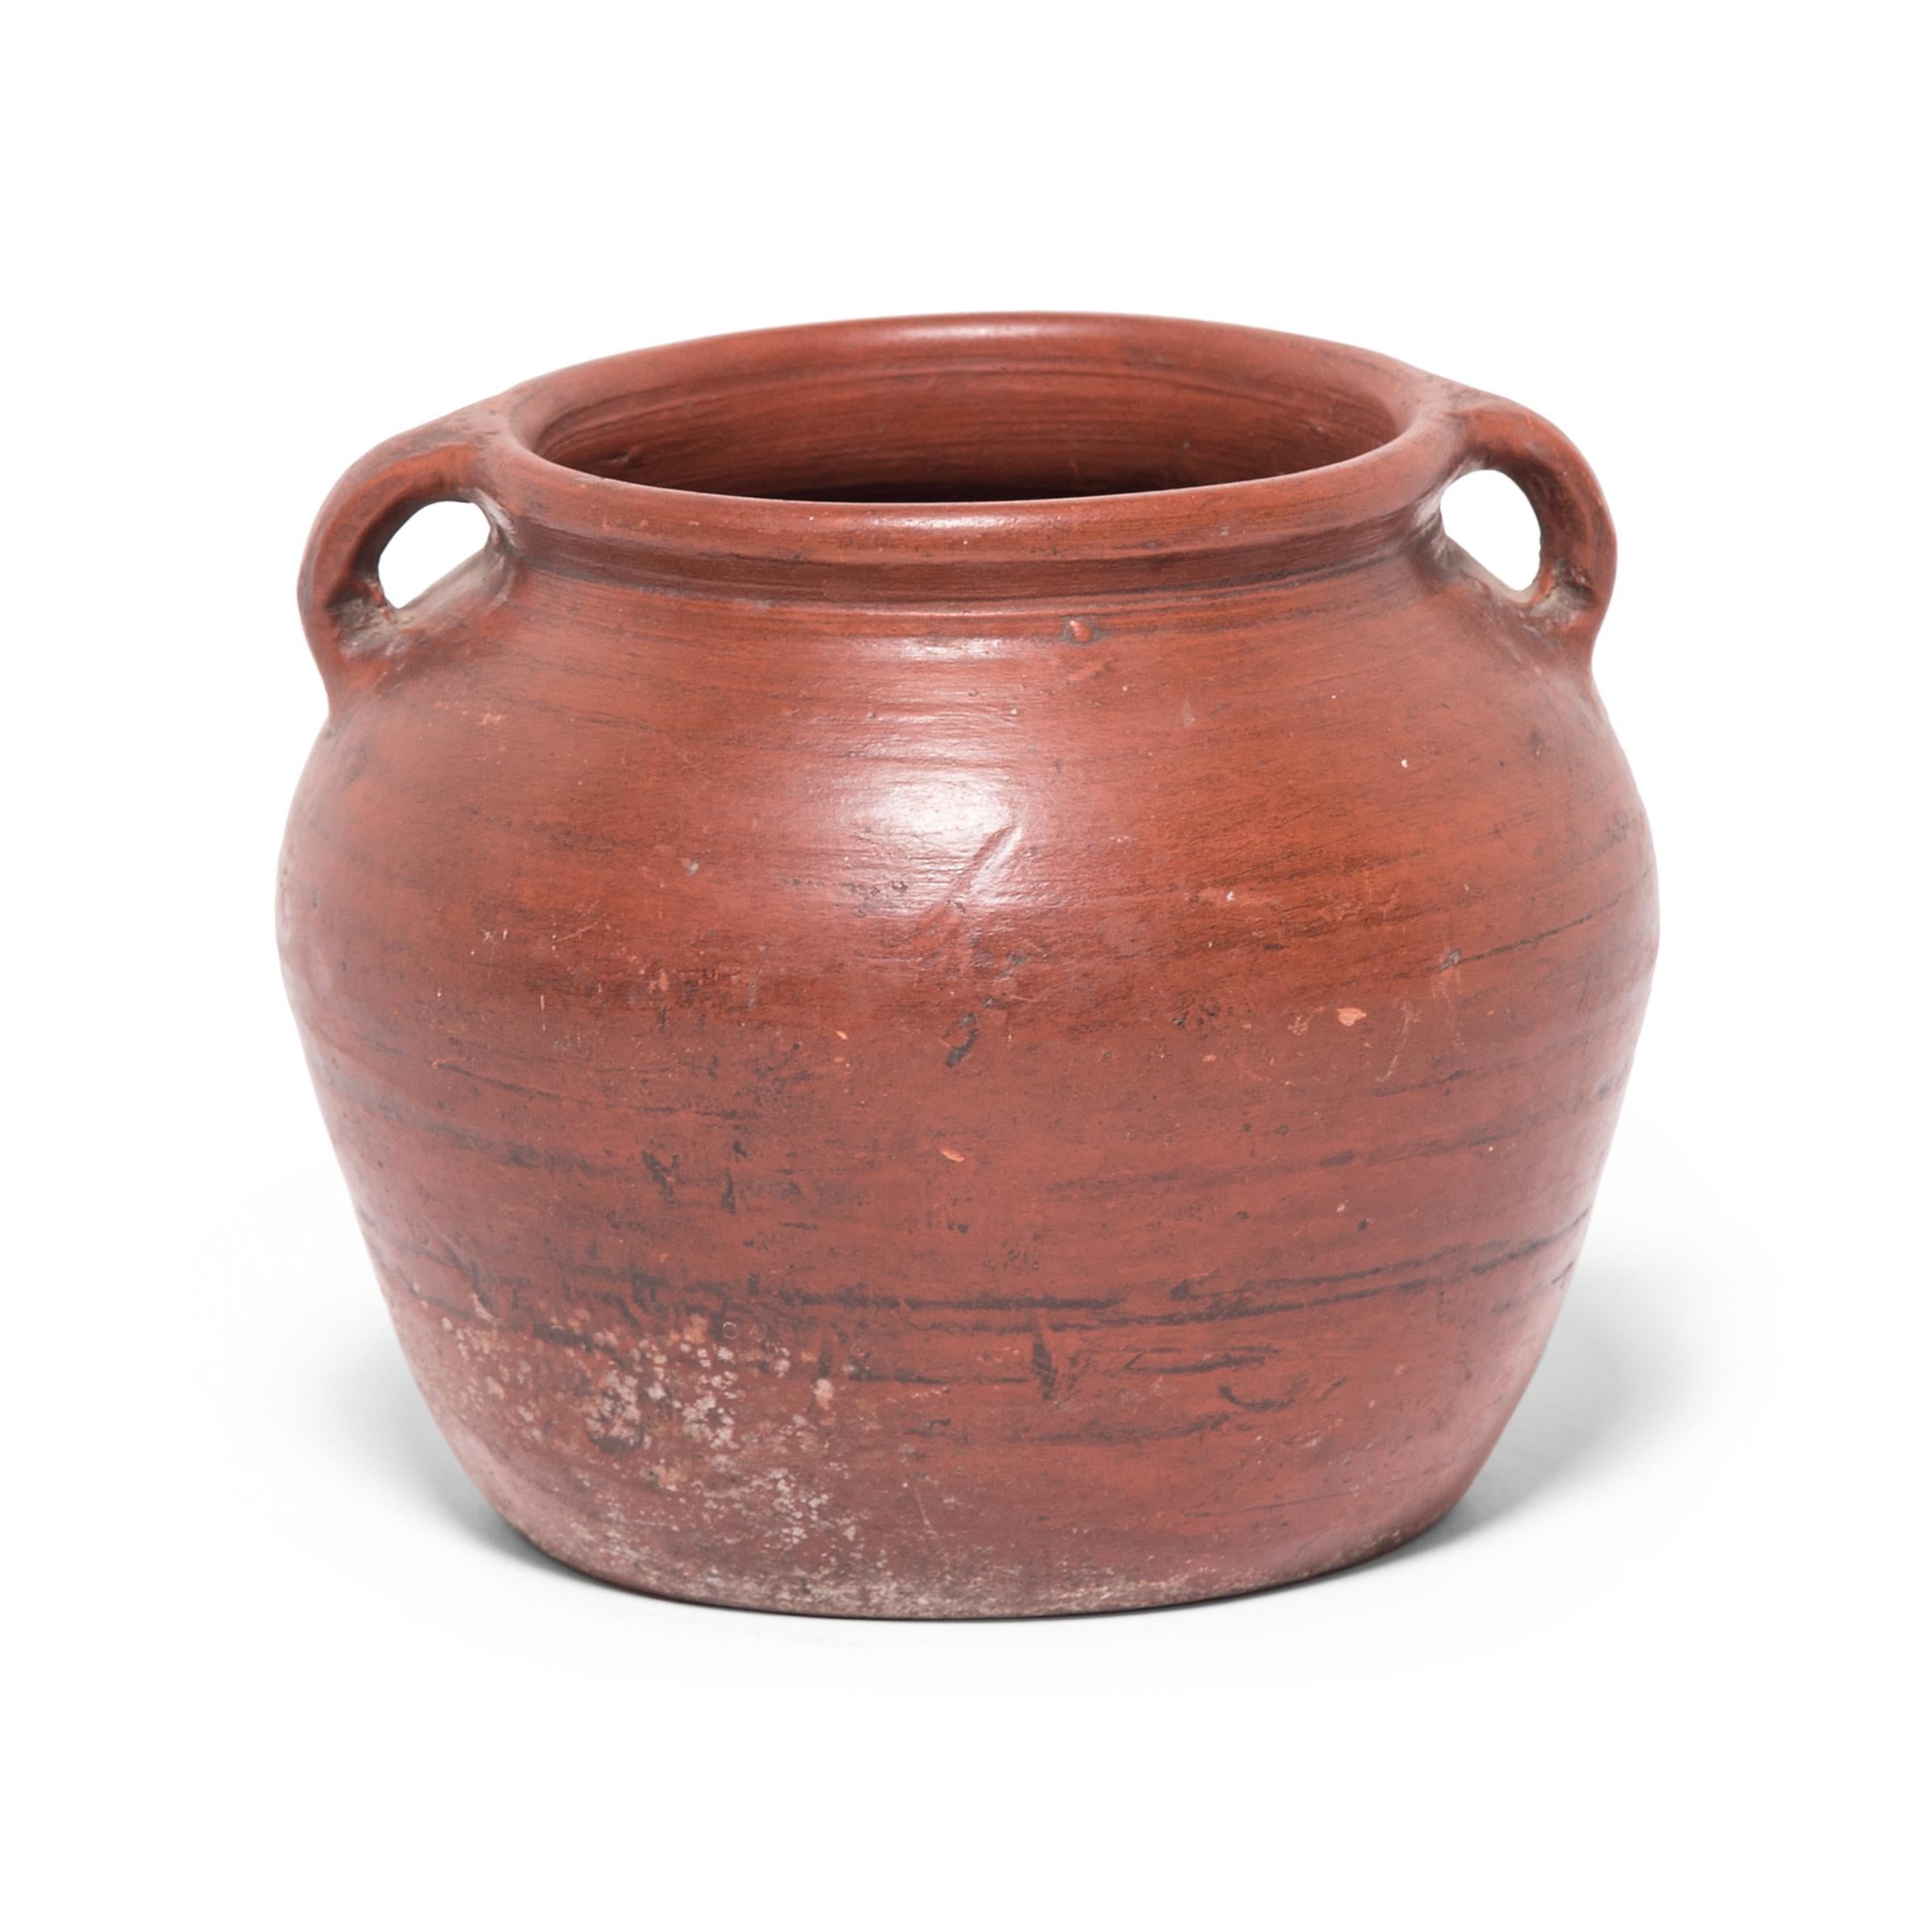 Based on vessels fired in ancient Chinese kilns, this jar's perfect proportions haven't changed much since the Bronze Age. Keeping in the tradition of its predecessors, this early 20th-century ceramic vessel is glazed with a slip of red clay,